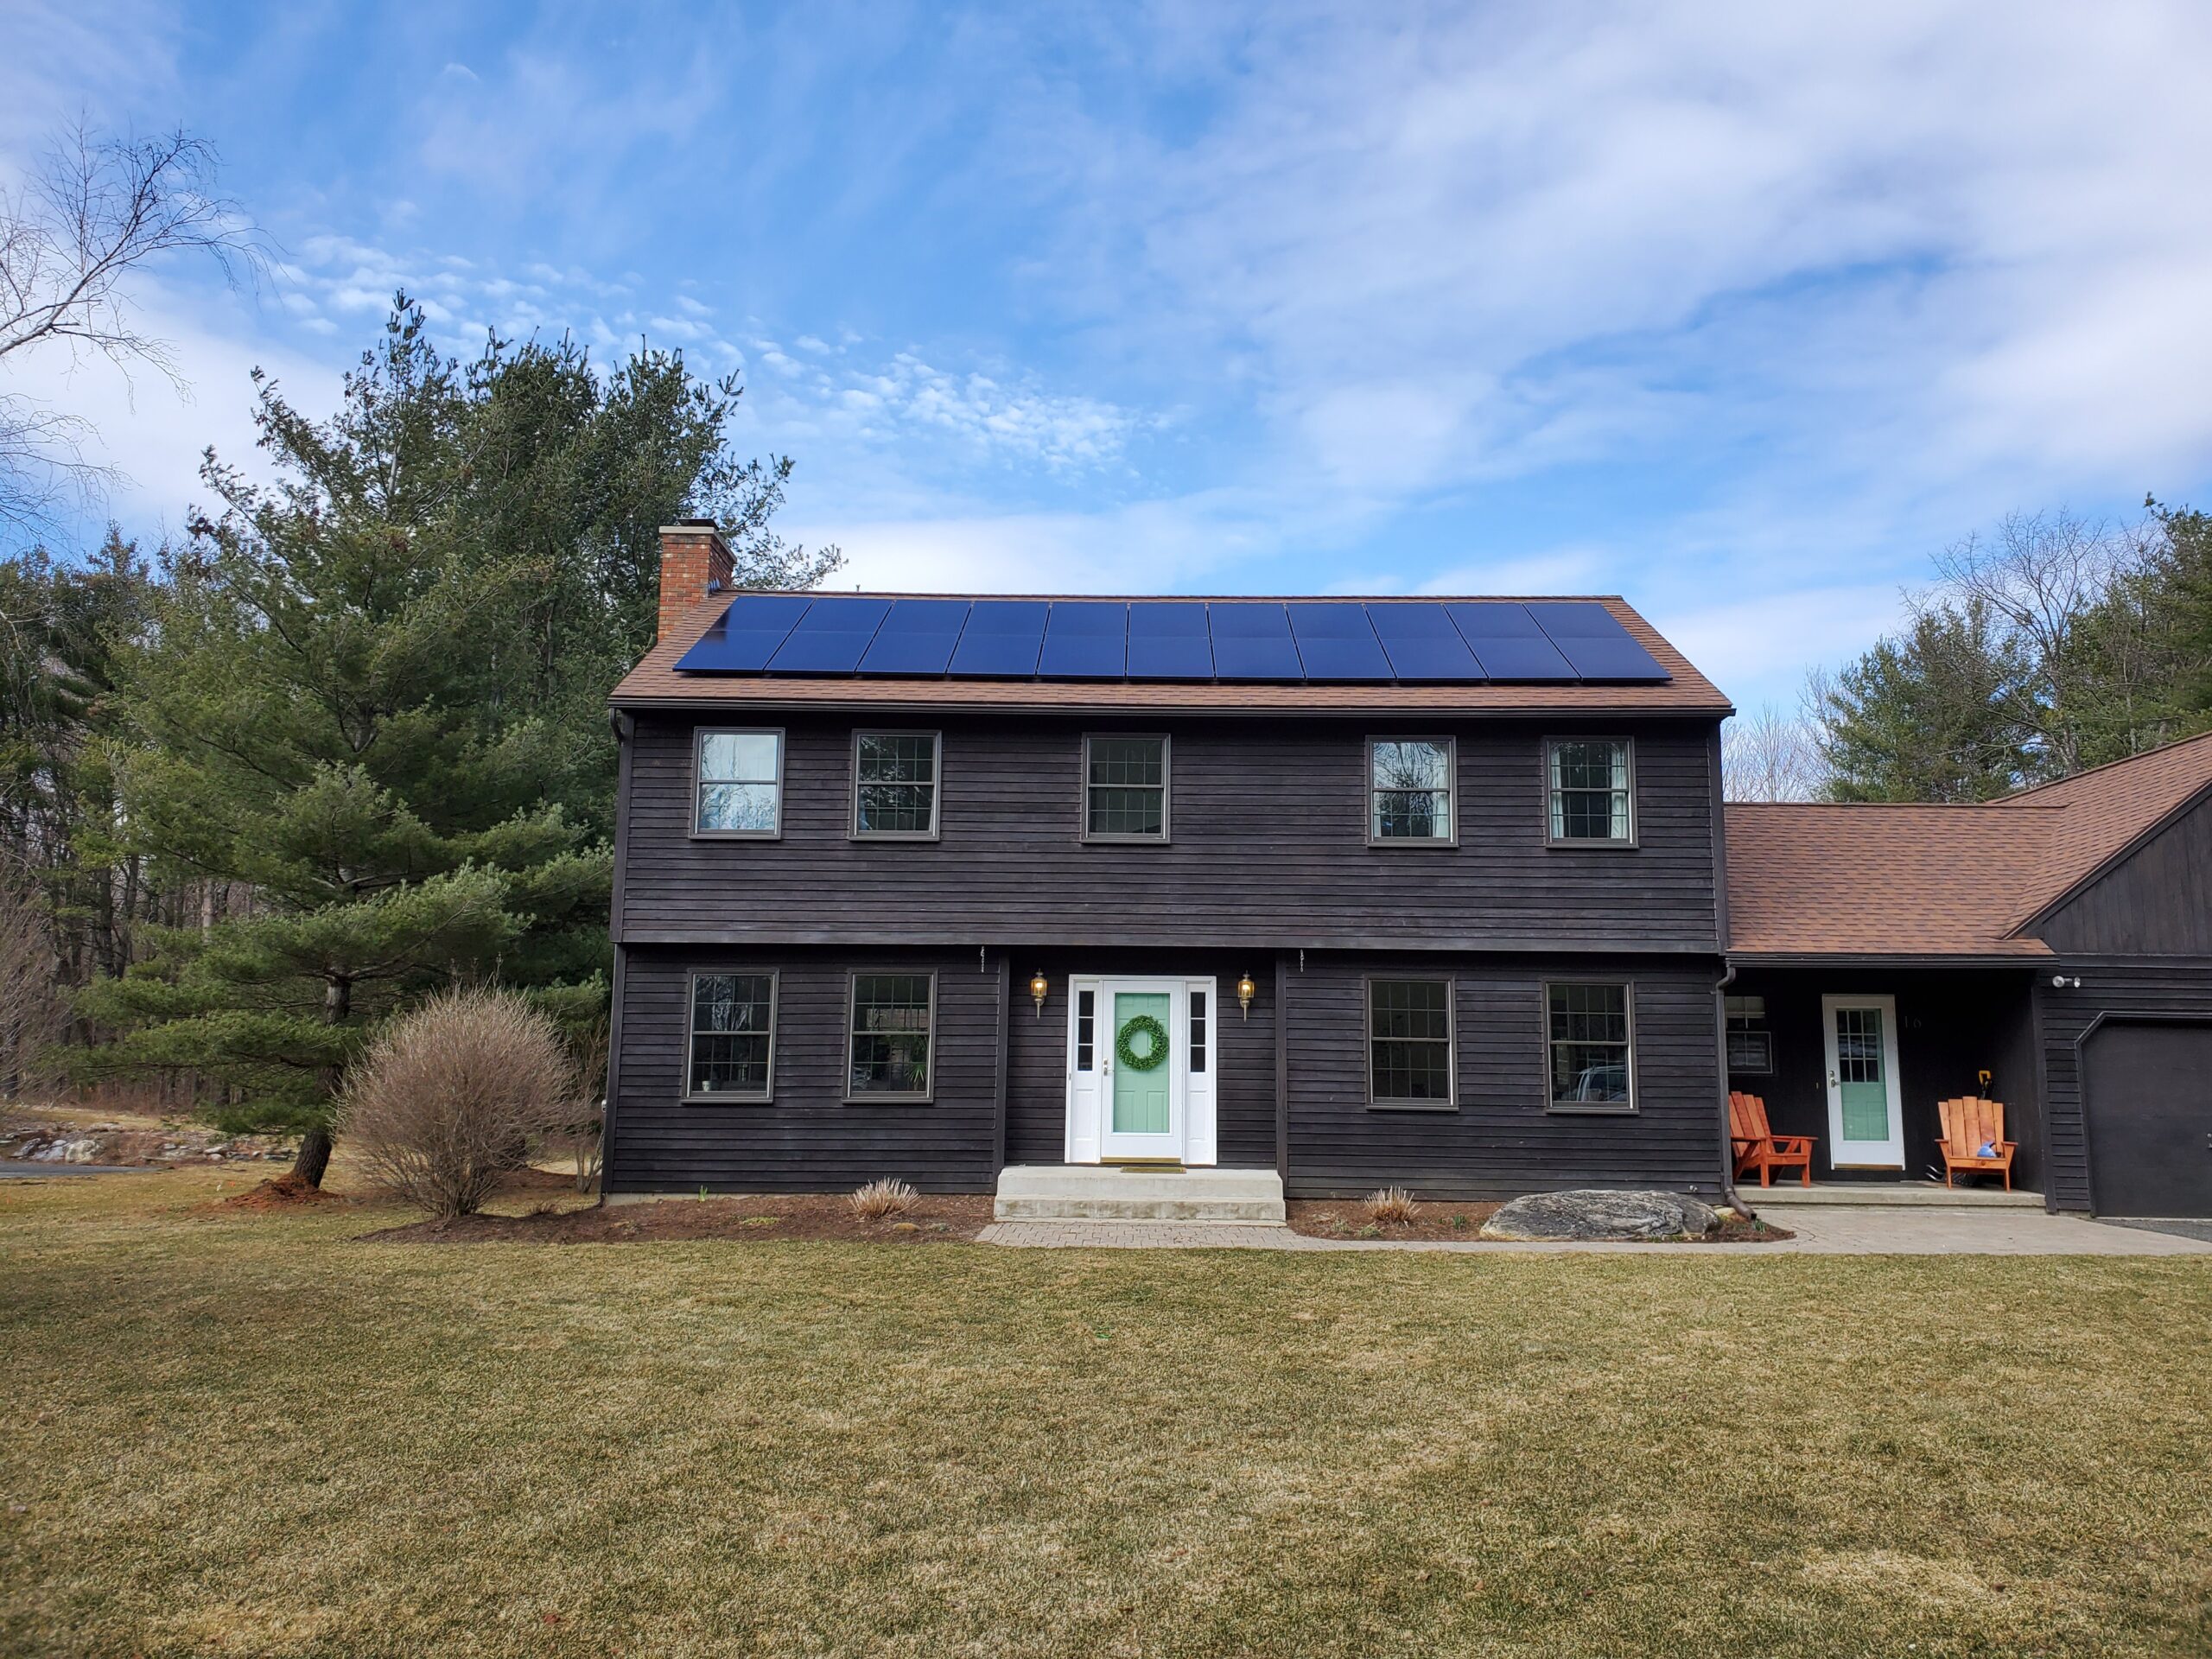 Maine solar incentives in the USA, Williamstown